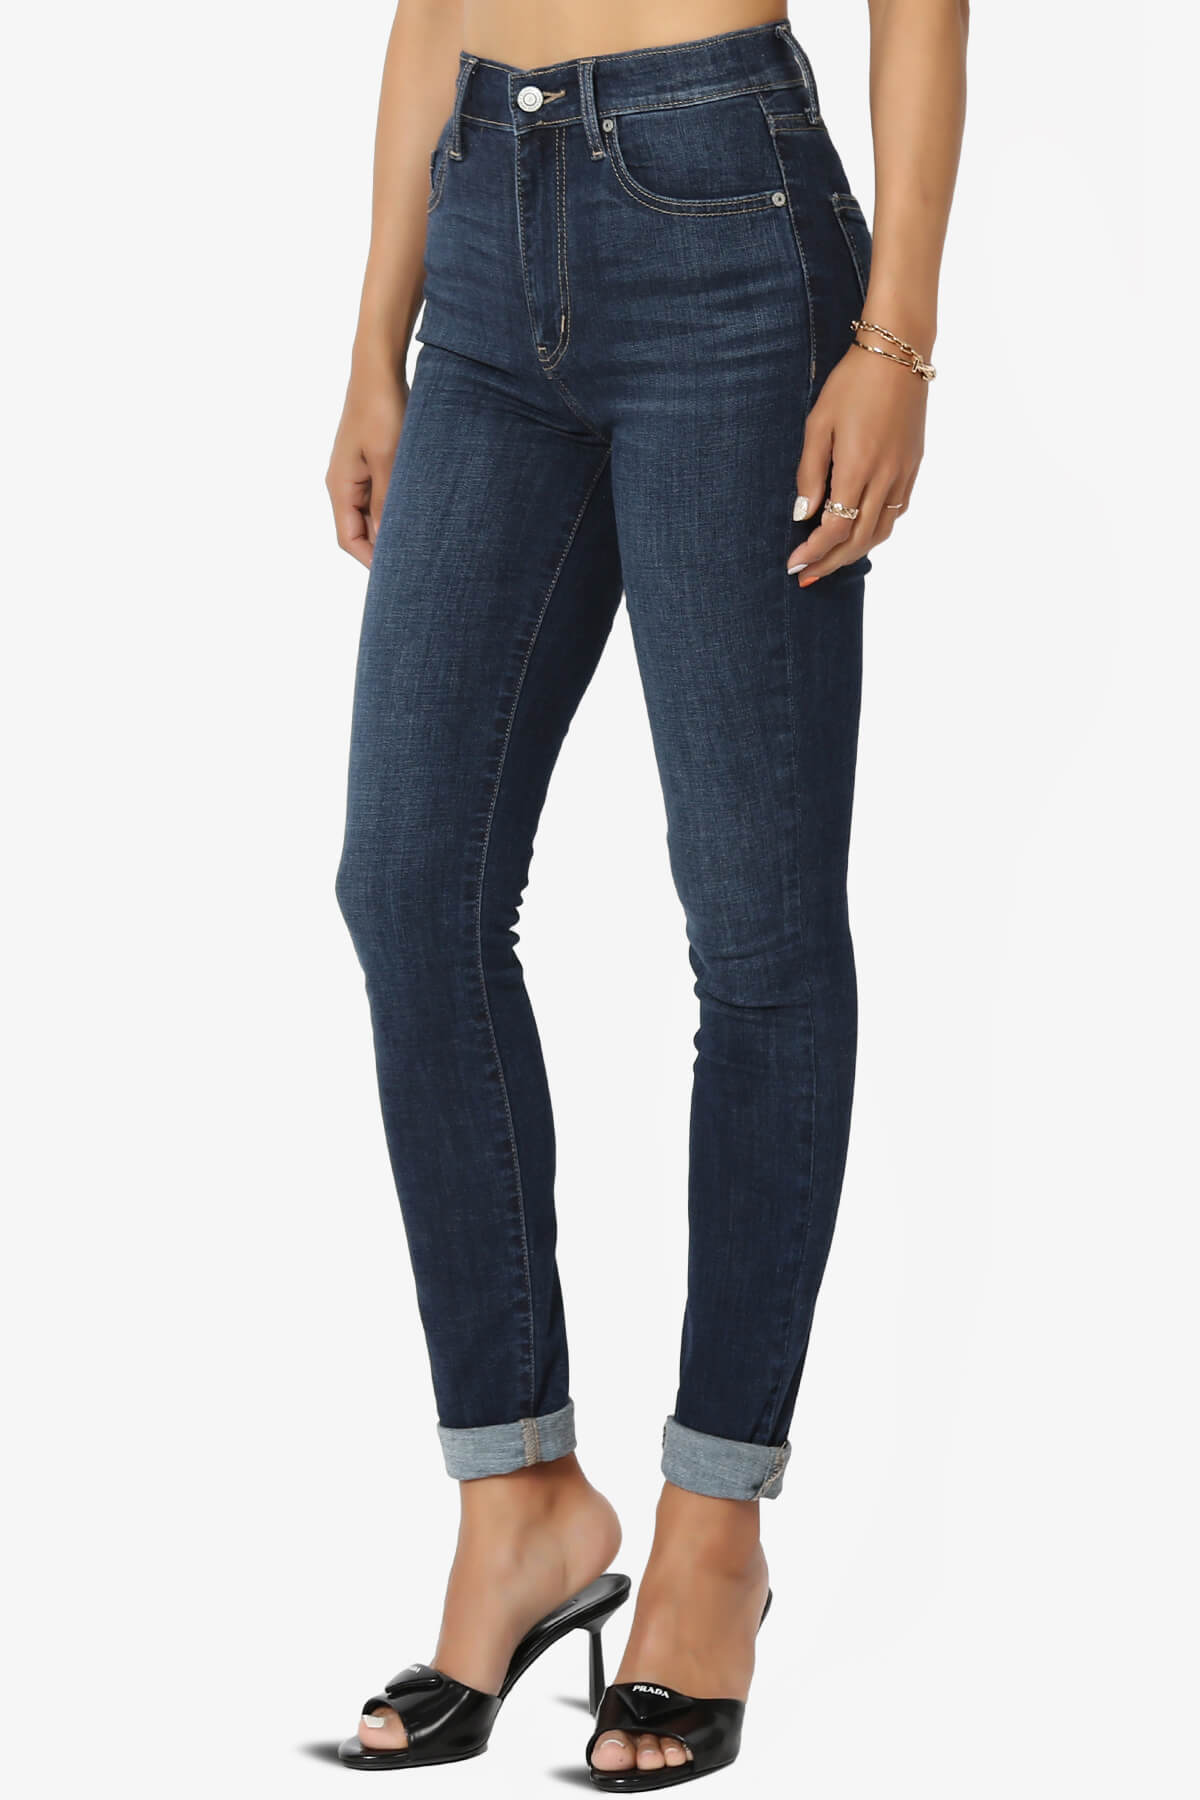 Load image into Gallery viewer, Jude High Rise Ankle Skinny Jeans in Bseat DARK_3
